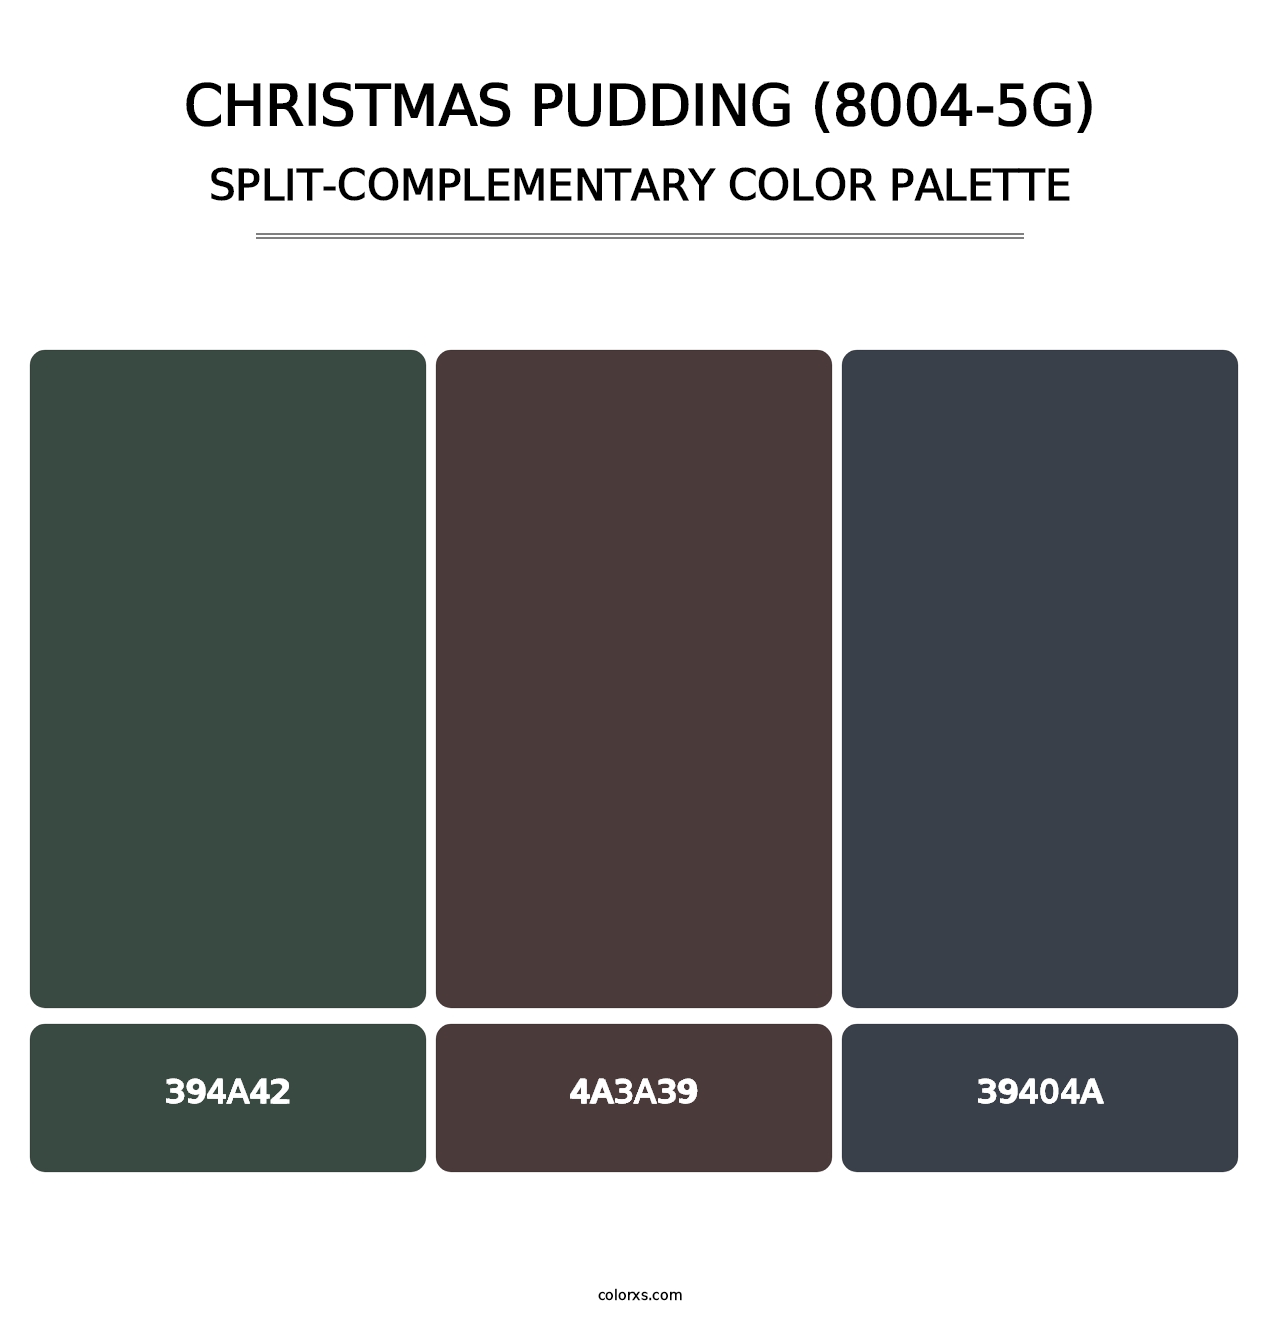 Christmas Pudding (8004-5G) - Split-Complementary Color Palette